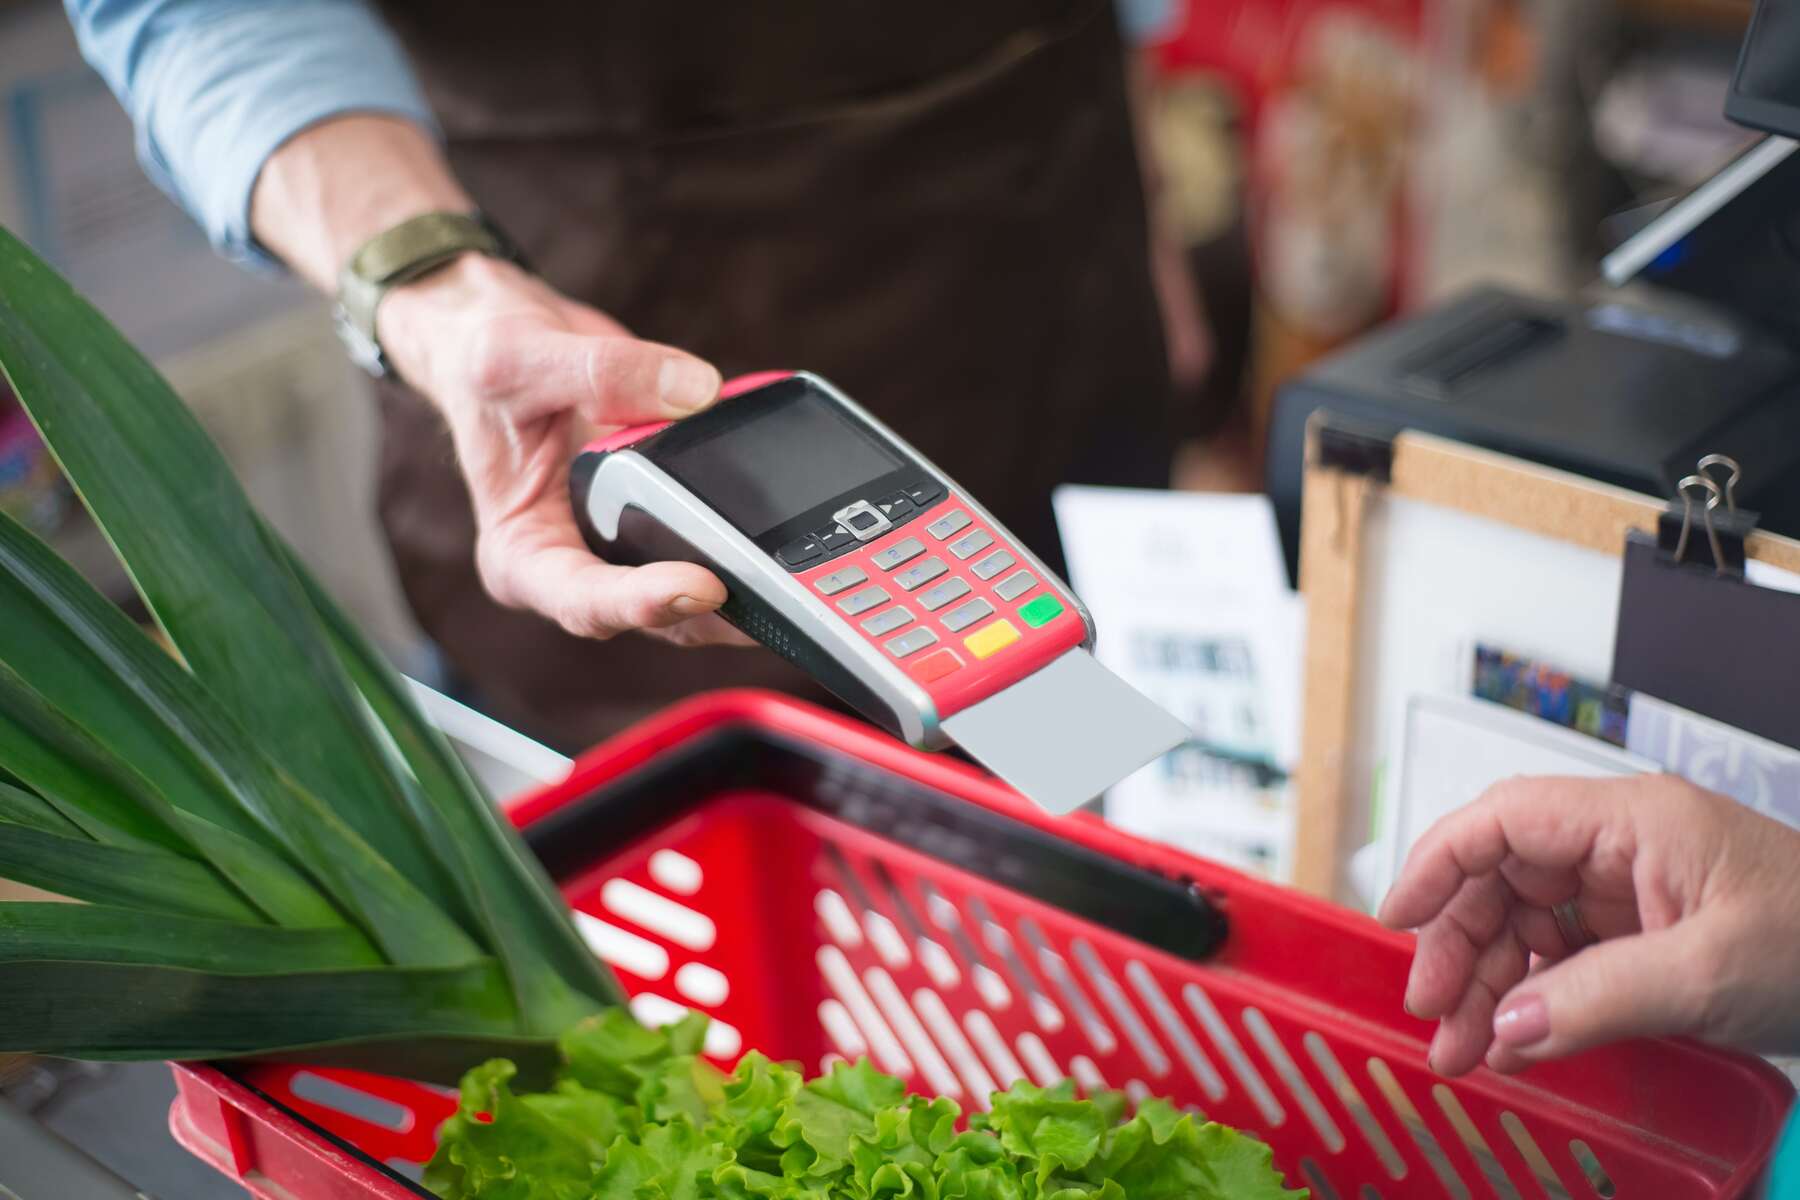 A cashier on a grocery store holding a terminal payment with a card in it